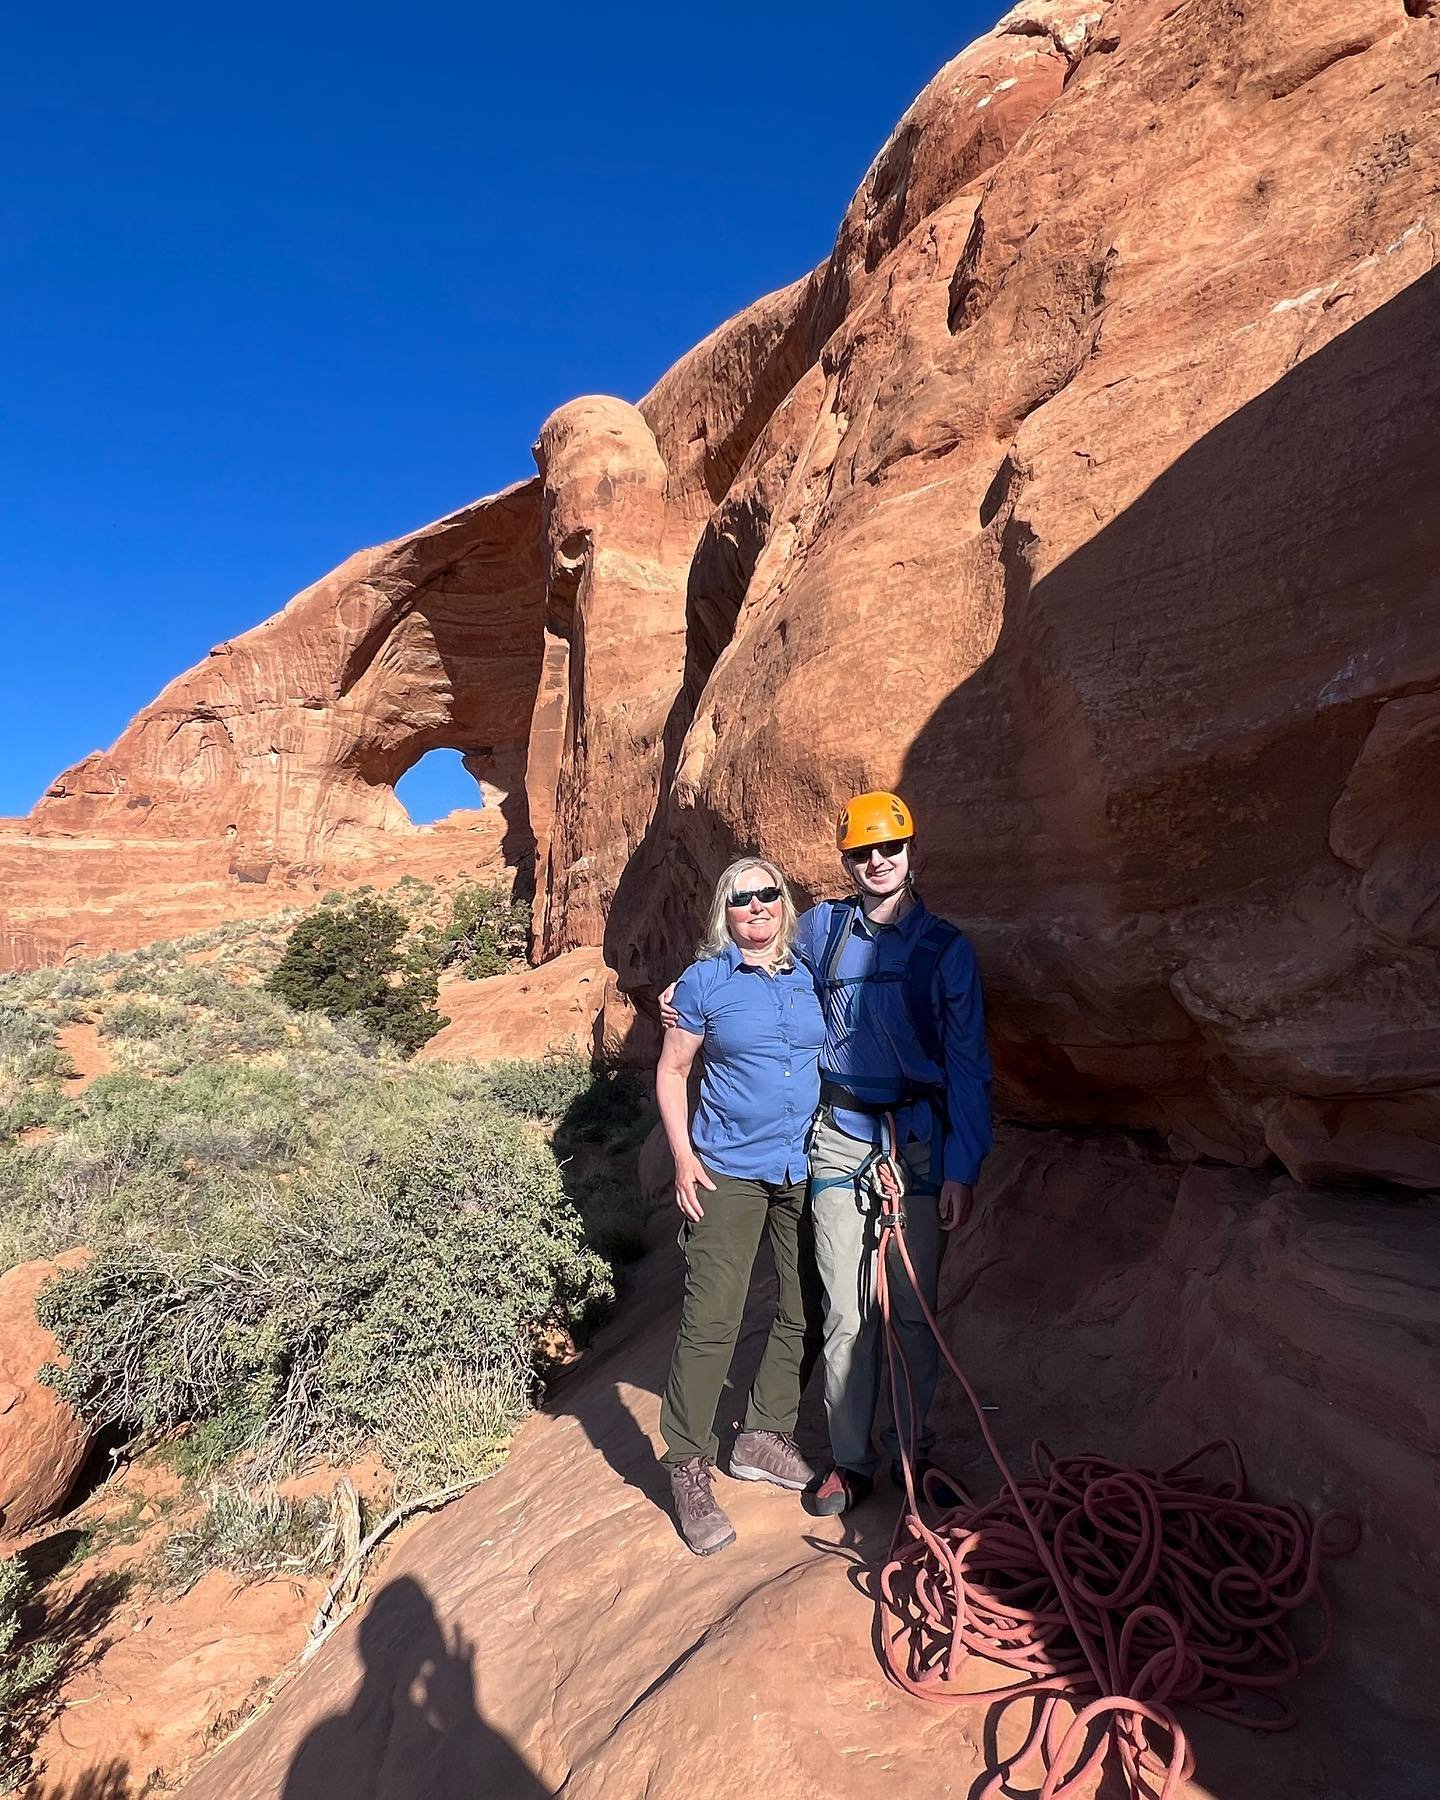 Rocking a perfect cool May morning on Looking Glass rock with James. The perfect intro multipitch rock climb and, in my opinion, the best rappel in the area. #bestofmoab #moabguideservice #moabguidedtours #moabmoabmoab #moab #rockclimbinggoals #deser